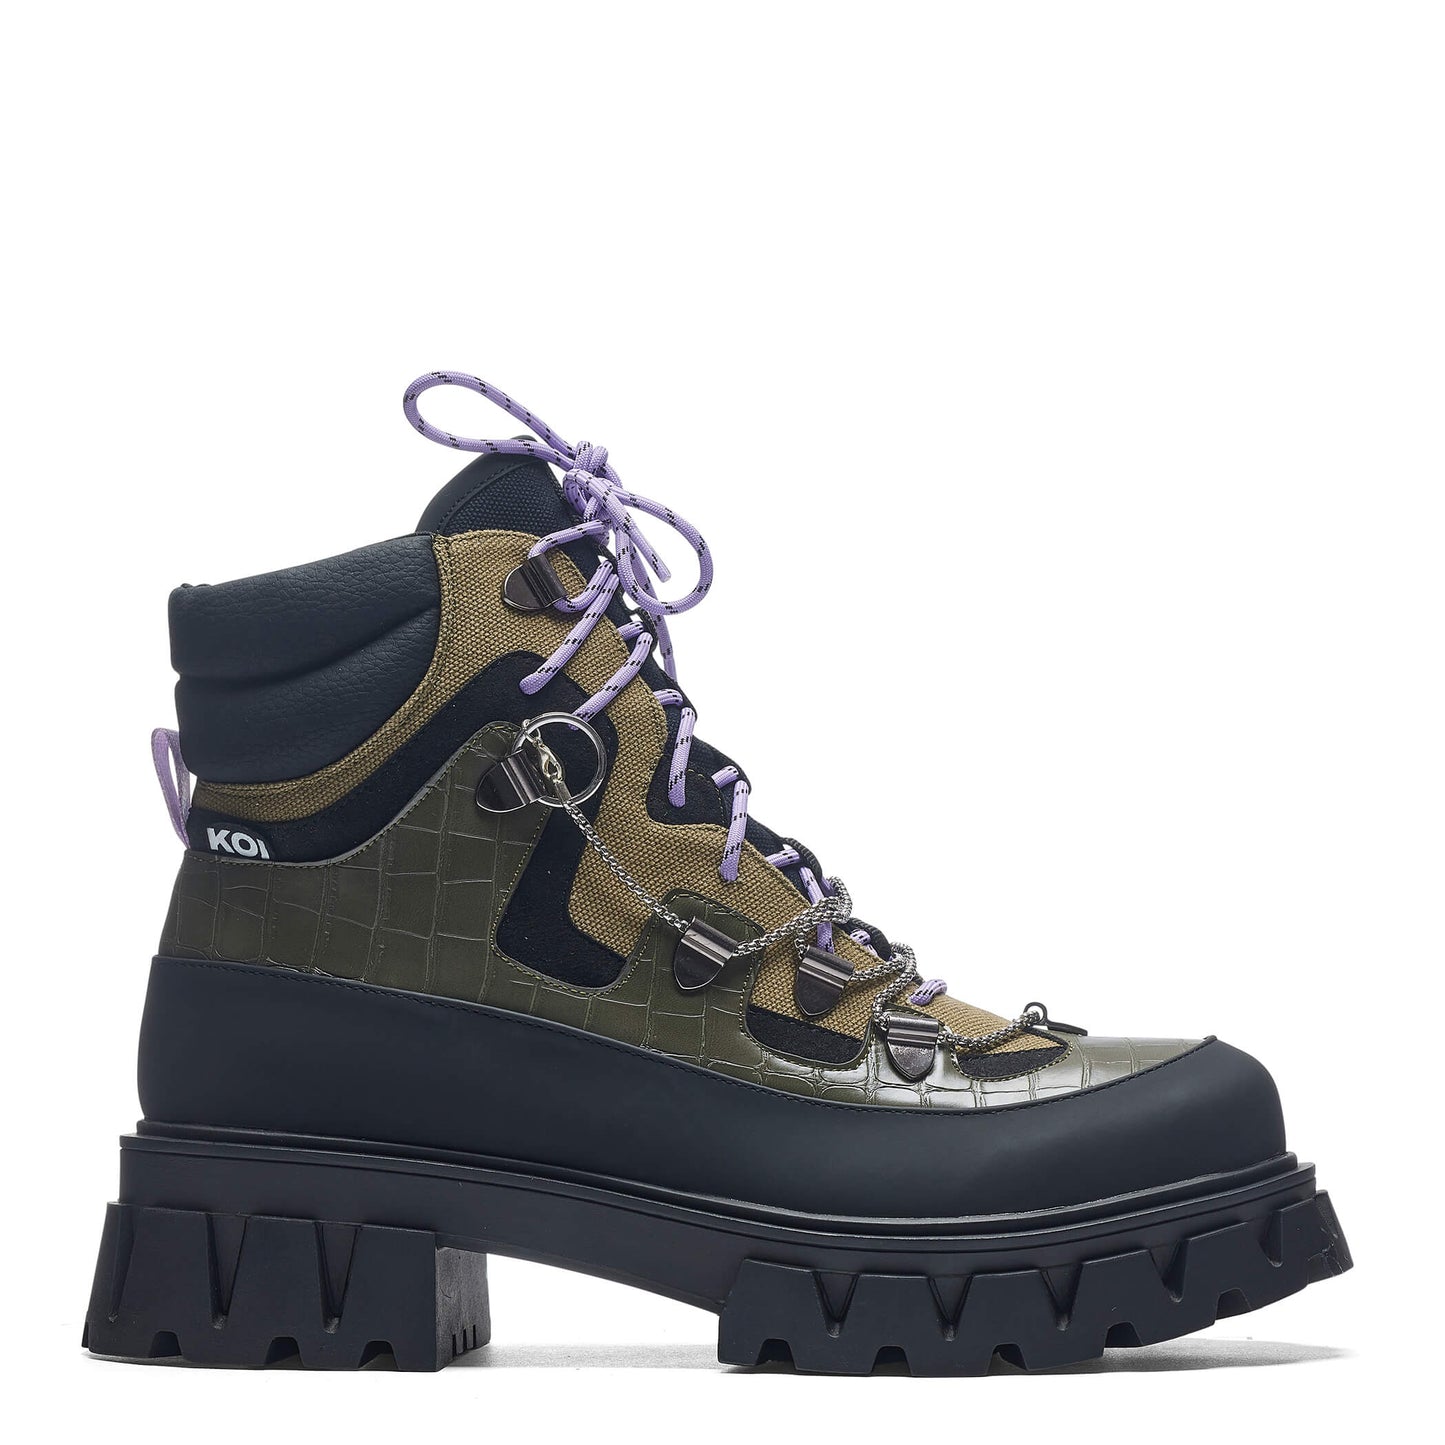 The Koi Reaper Men's Hiking Boots - Tanned Croc - Ankle Boots - KOI Footwear - Green - Side View